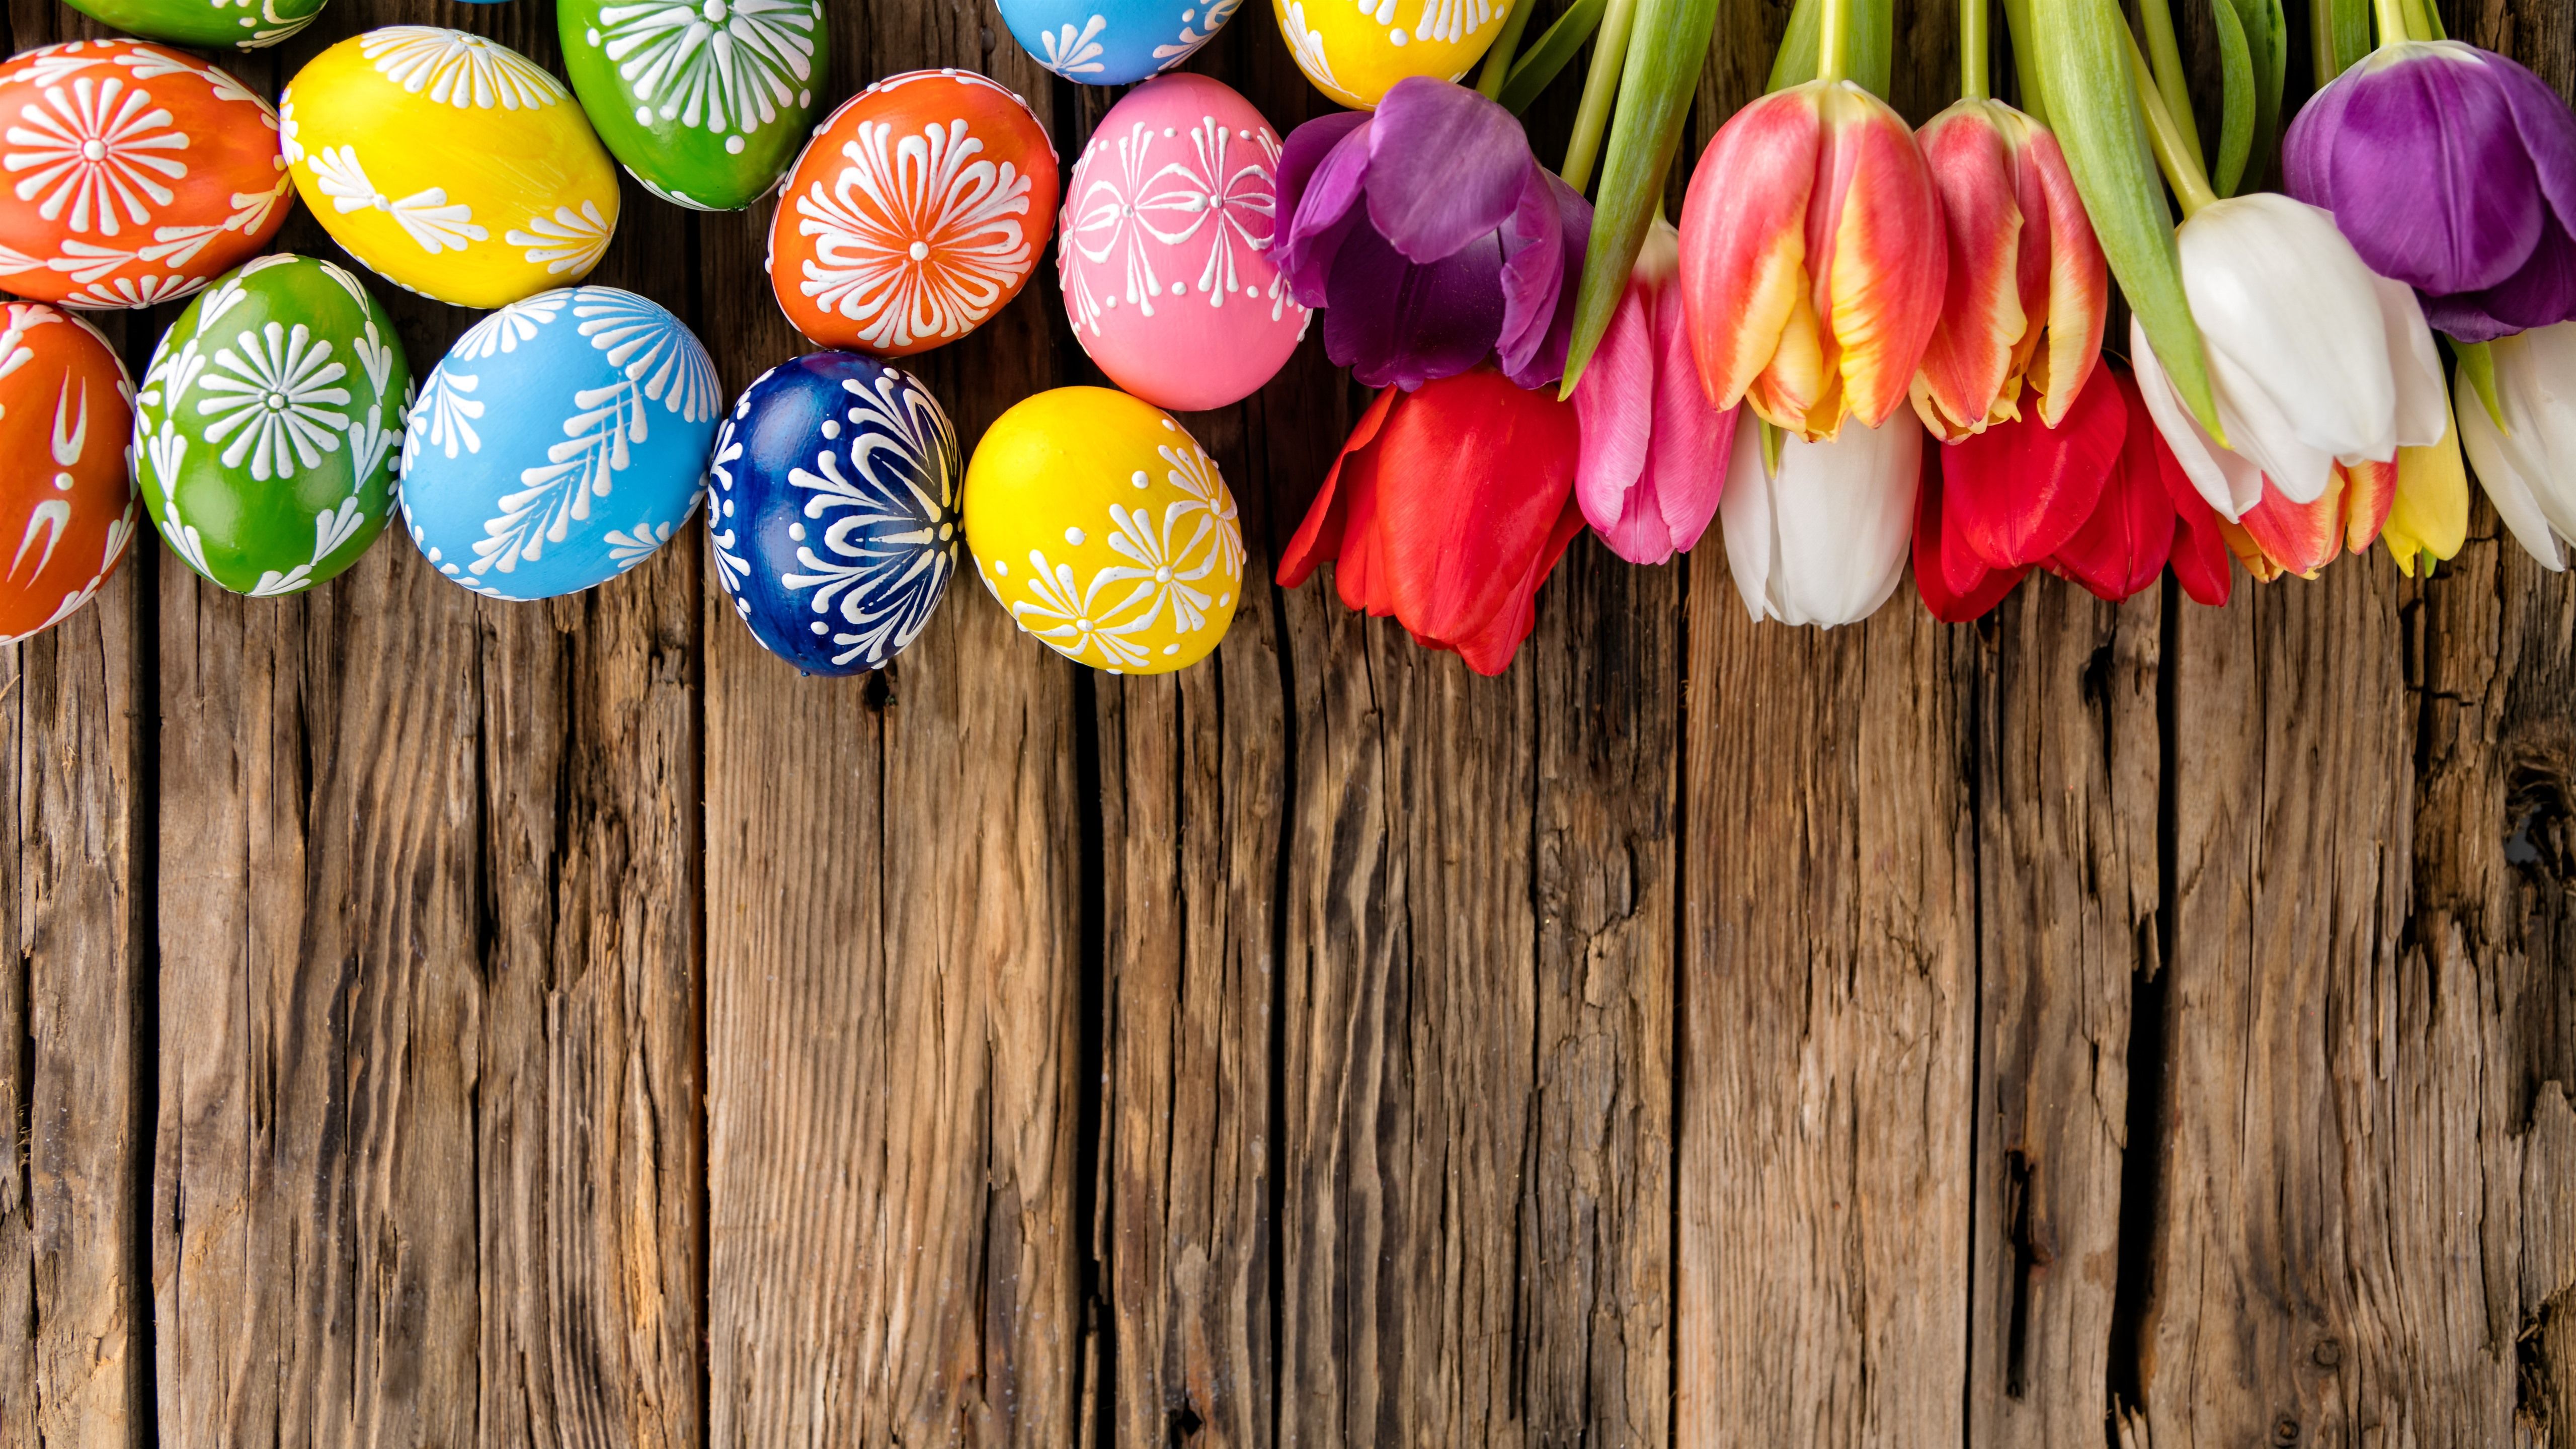 Wallpaper Colorful Easter eggs, tulips, wood board 5120x2880 UHD 5K Picture, Image